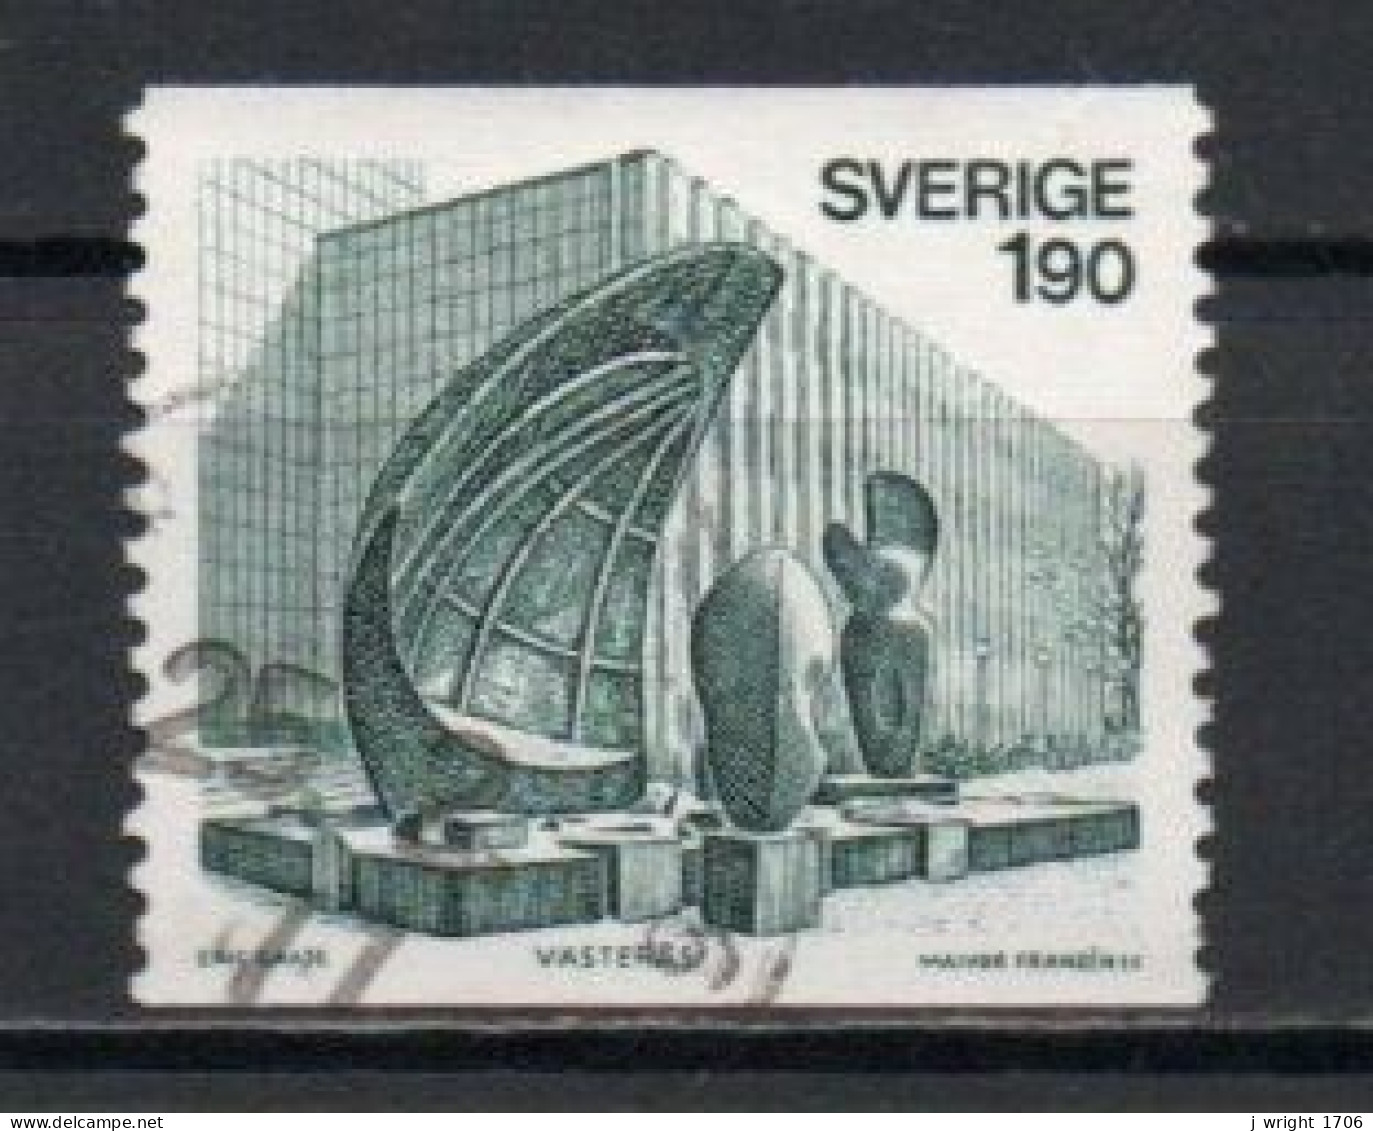 Sweden, 1976, Cave Of The Winds, 1.90kr, USED - Gebraucht